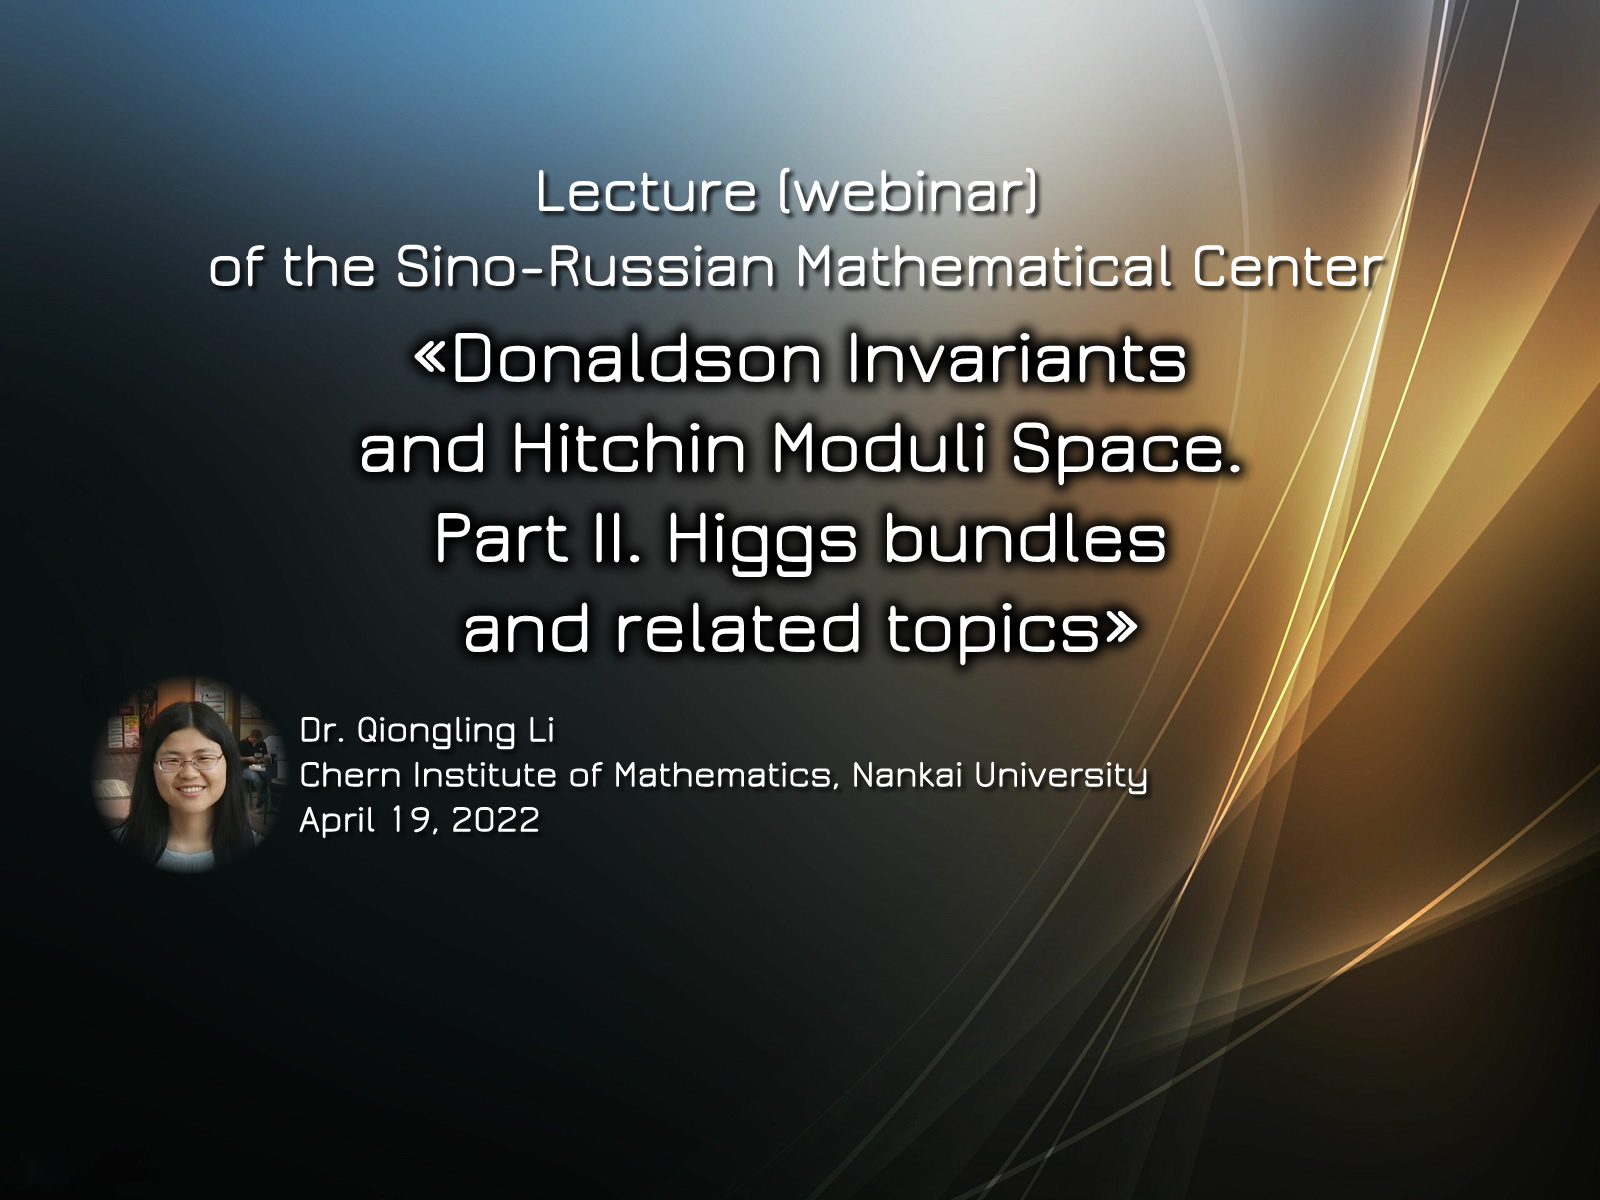 «Higgs bundles and related topics» 19.04.2022